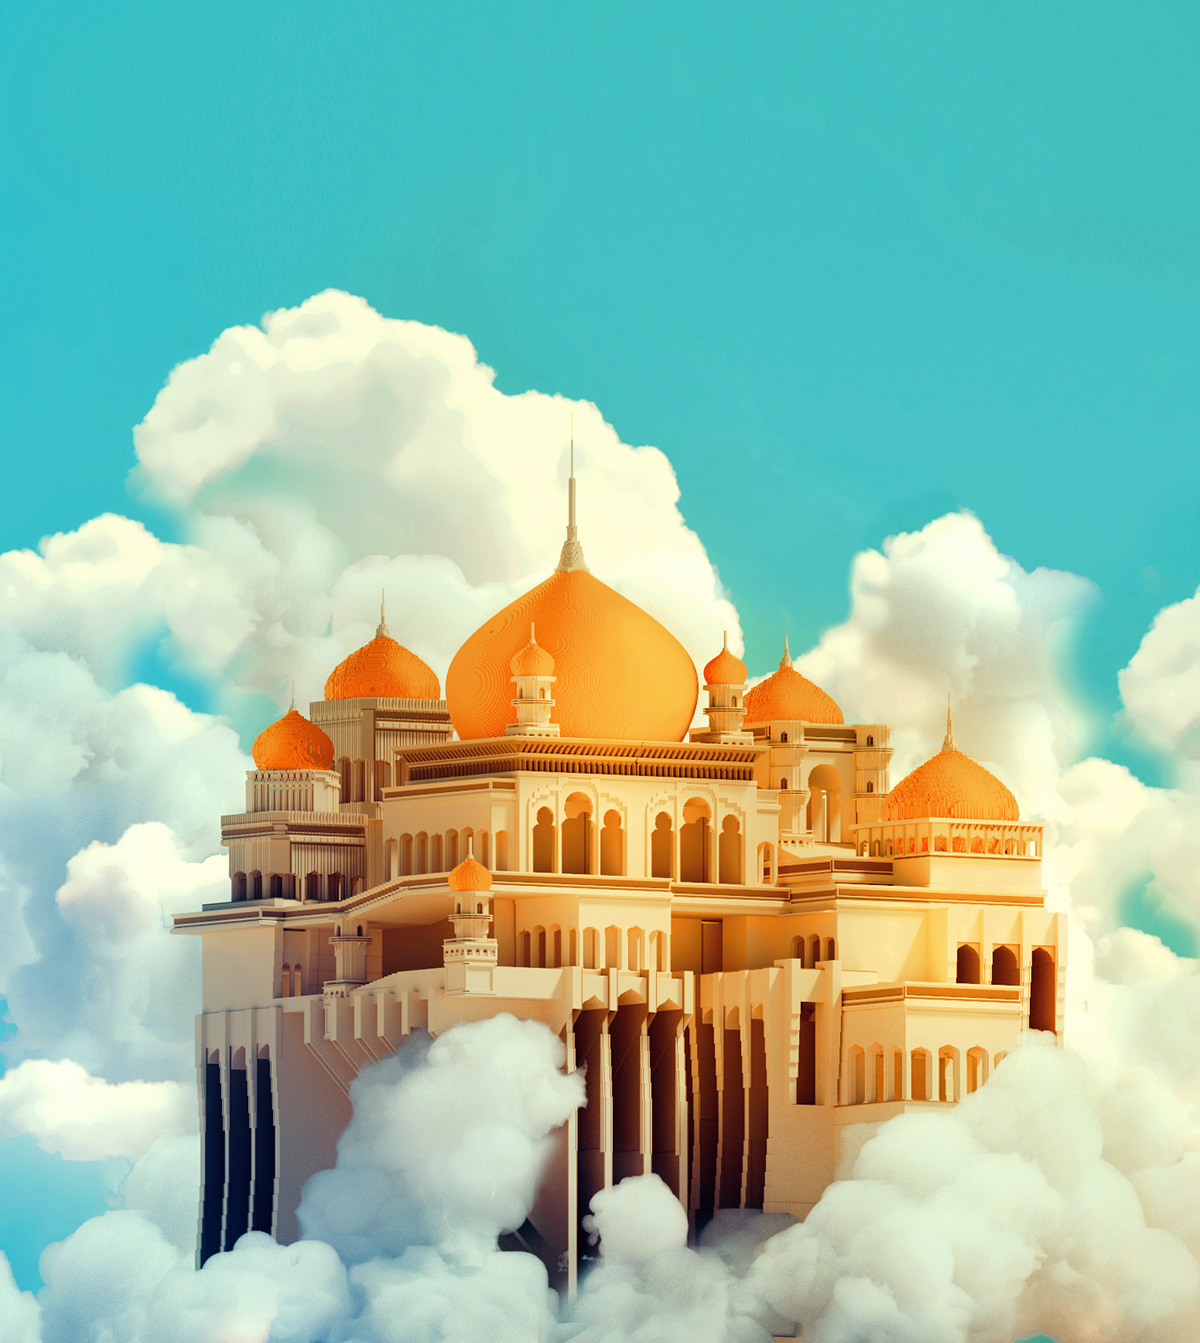 voxel voxelart Magicavoxel palace pop Princeofpersia Isometric lowpoly